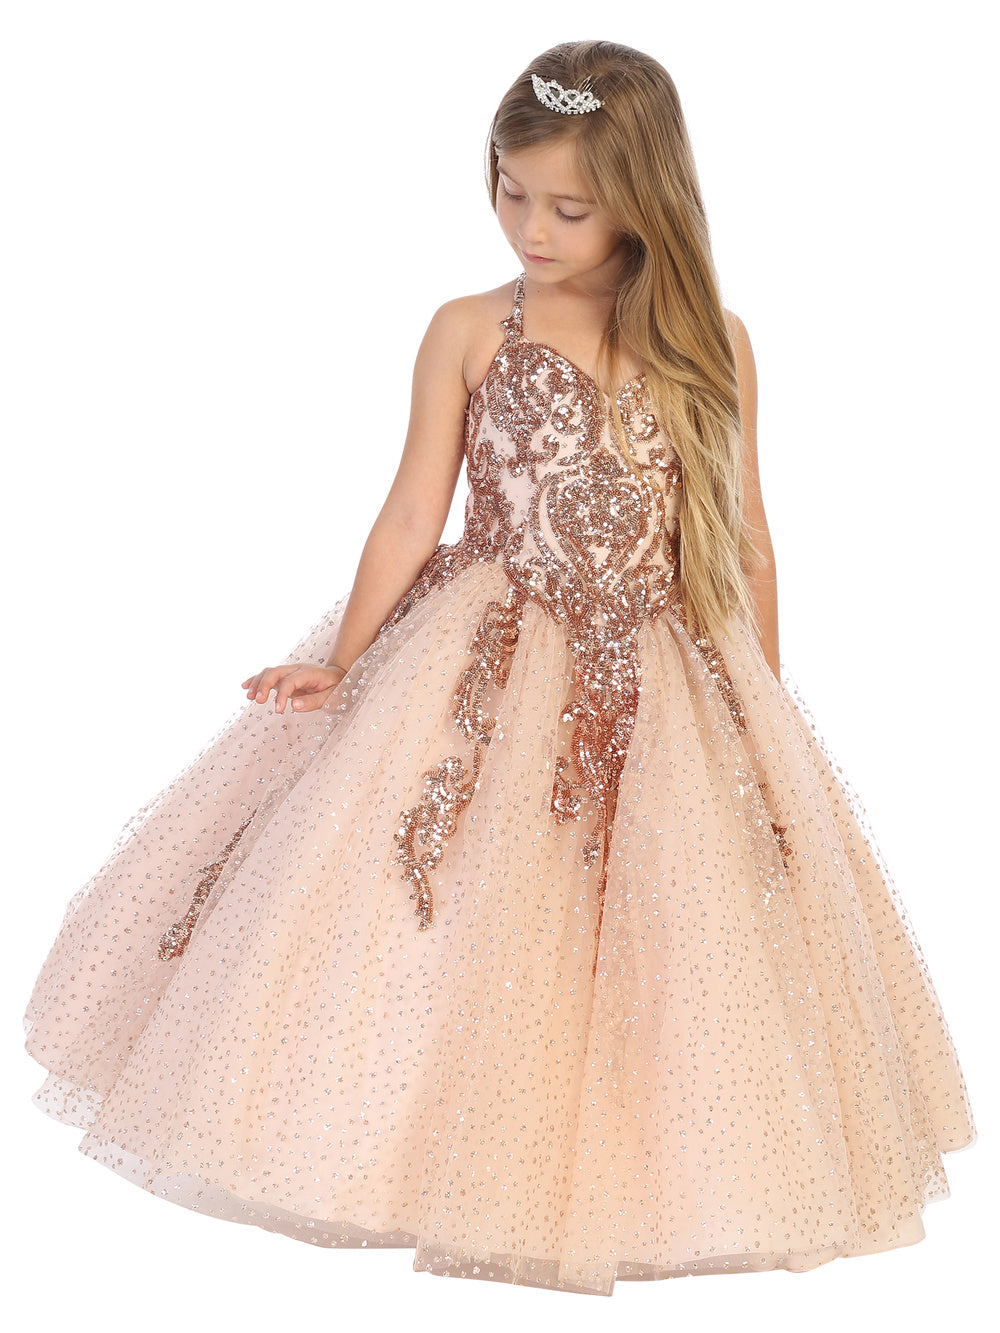 DQ K727 Size 2 Rose Gold Girls Ballgown Pageant Dress Sequin Lace Glitter Corset  Girls Glittering A Line Ball Gown  Available Size: 2  Available Color: Rose Gold